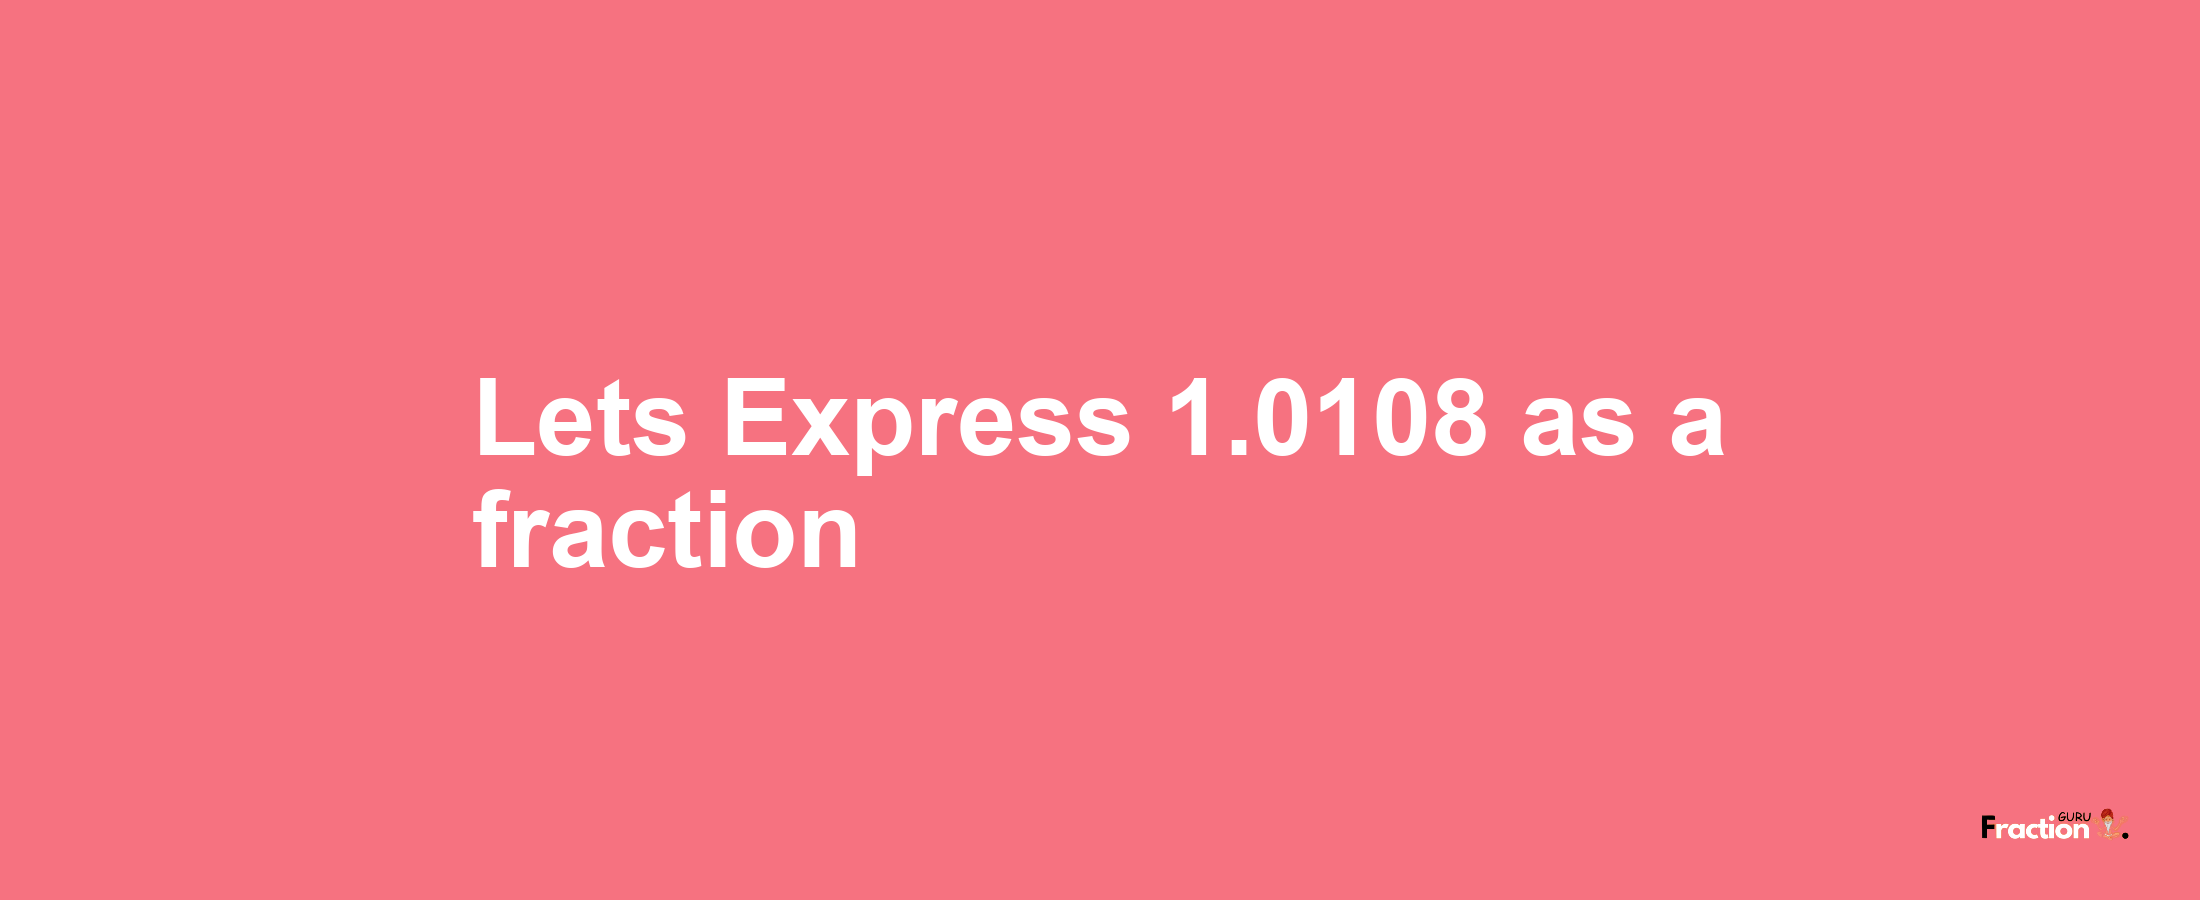 Lets Express 1.0108 as afraction